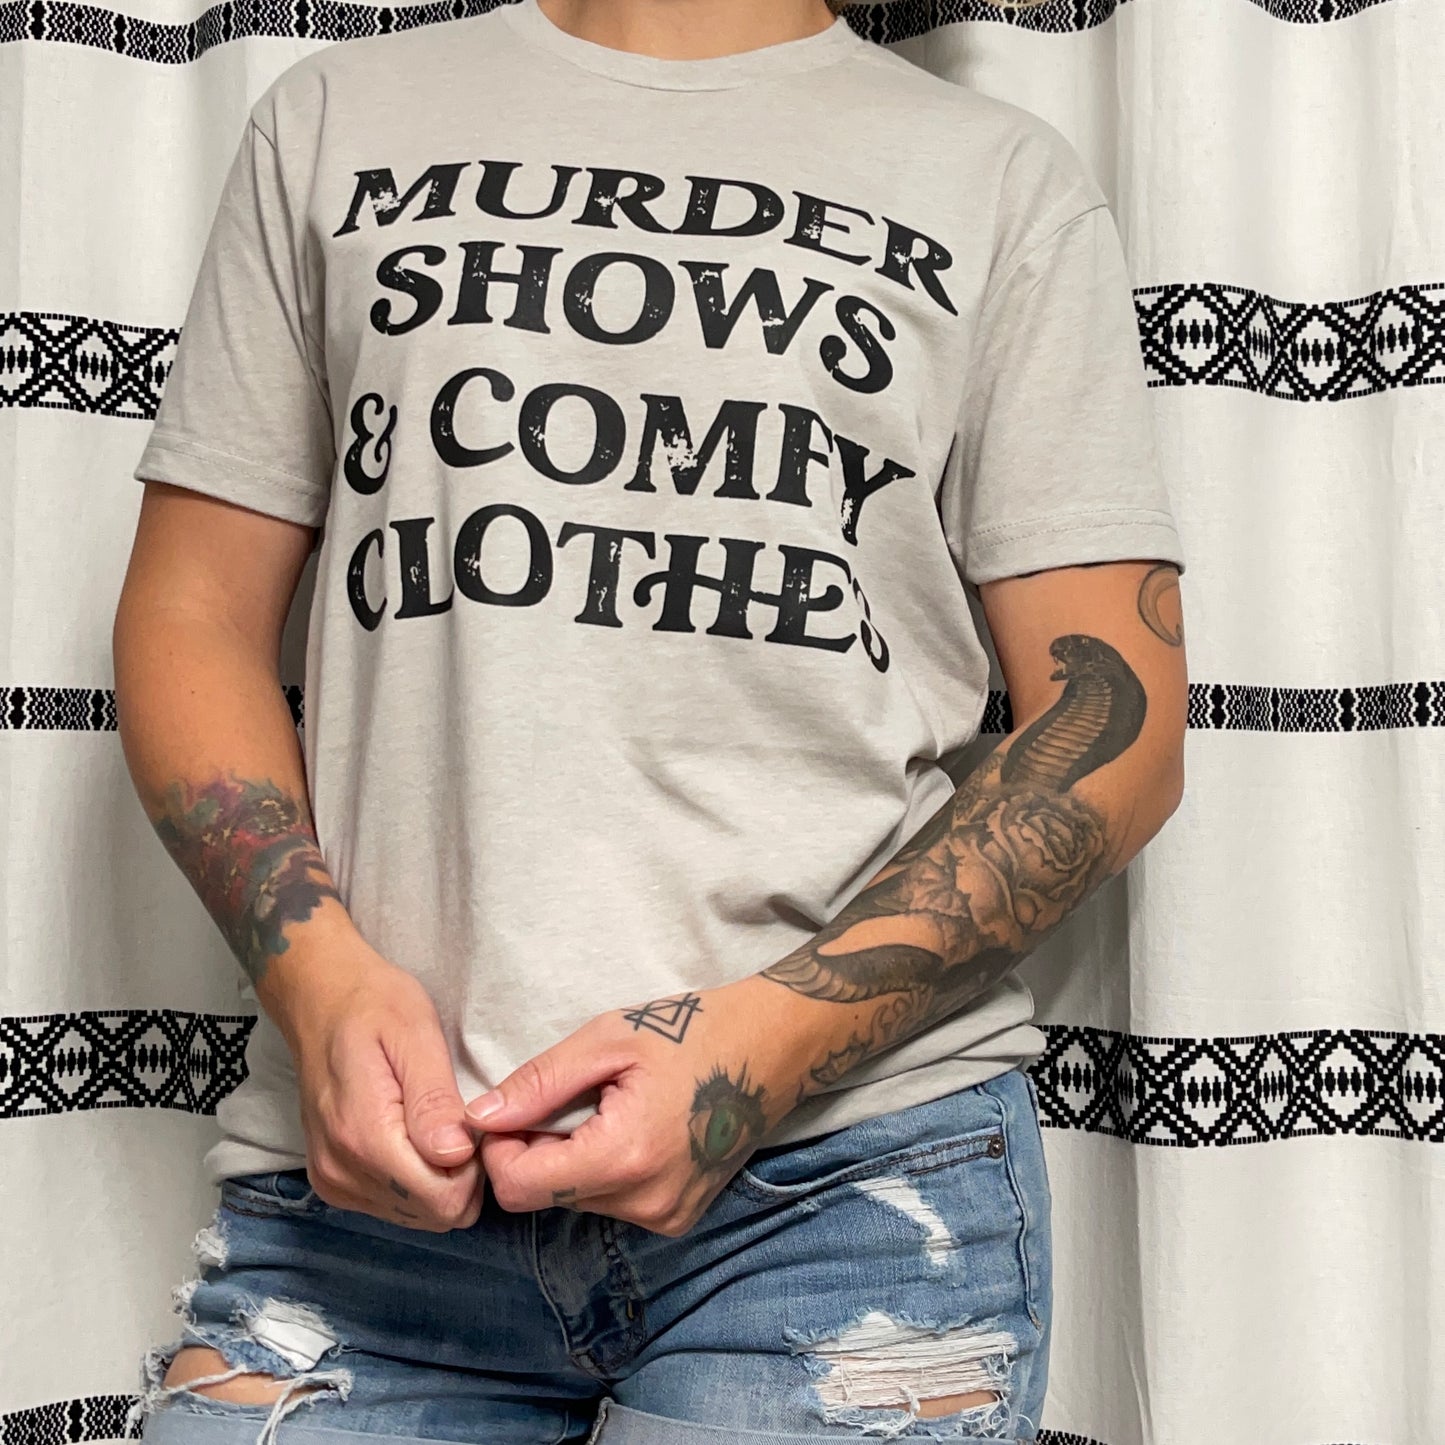 Murder shows and comfy clothes